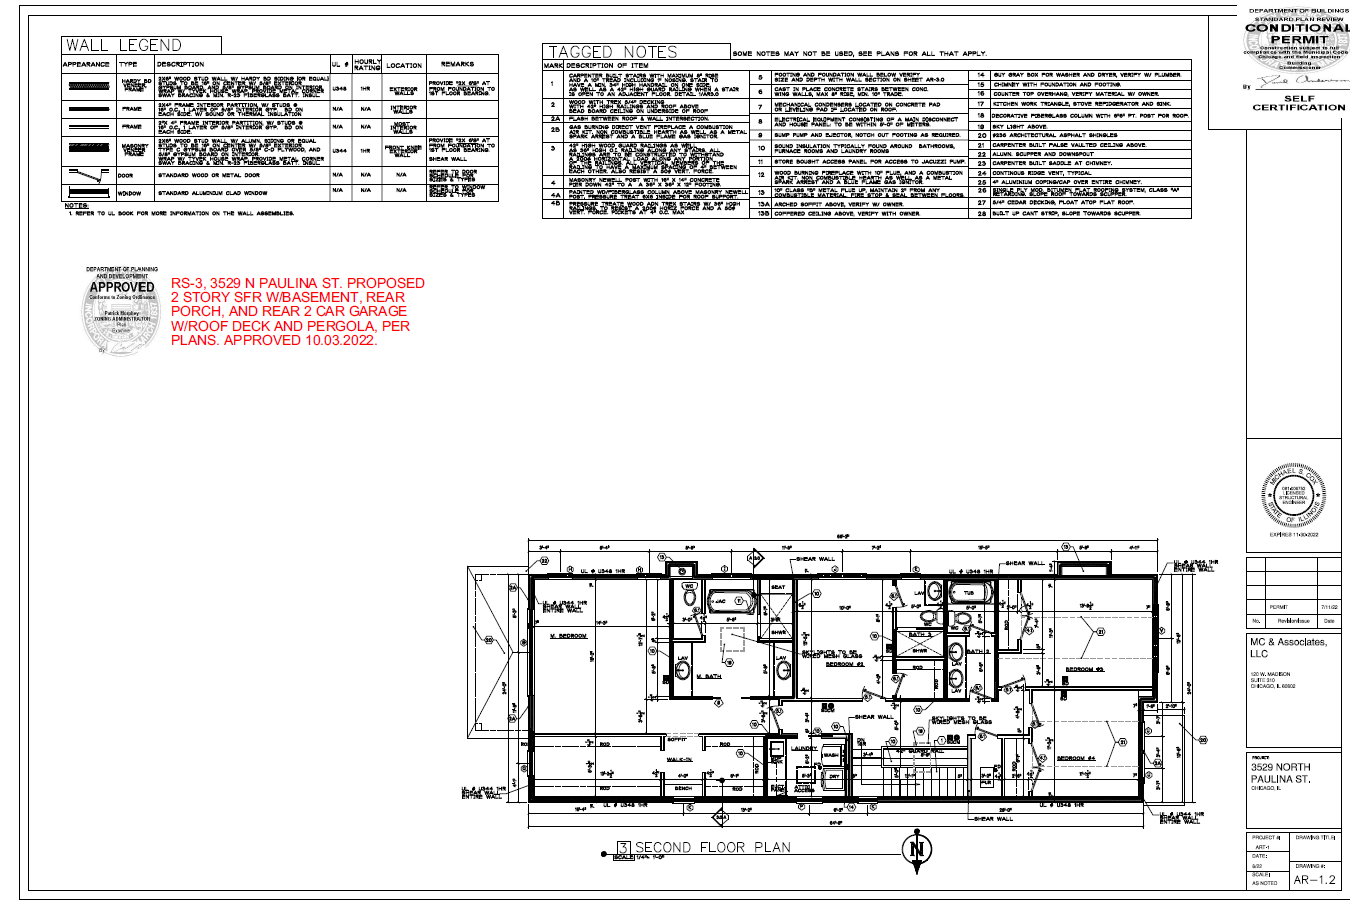 Plan of the Real Estate Second Floor